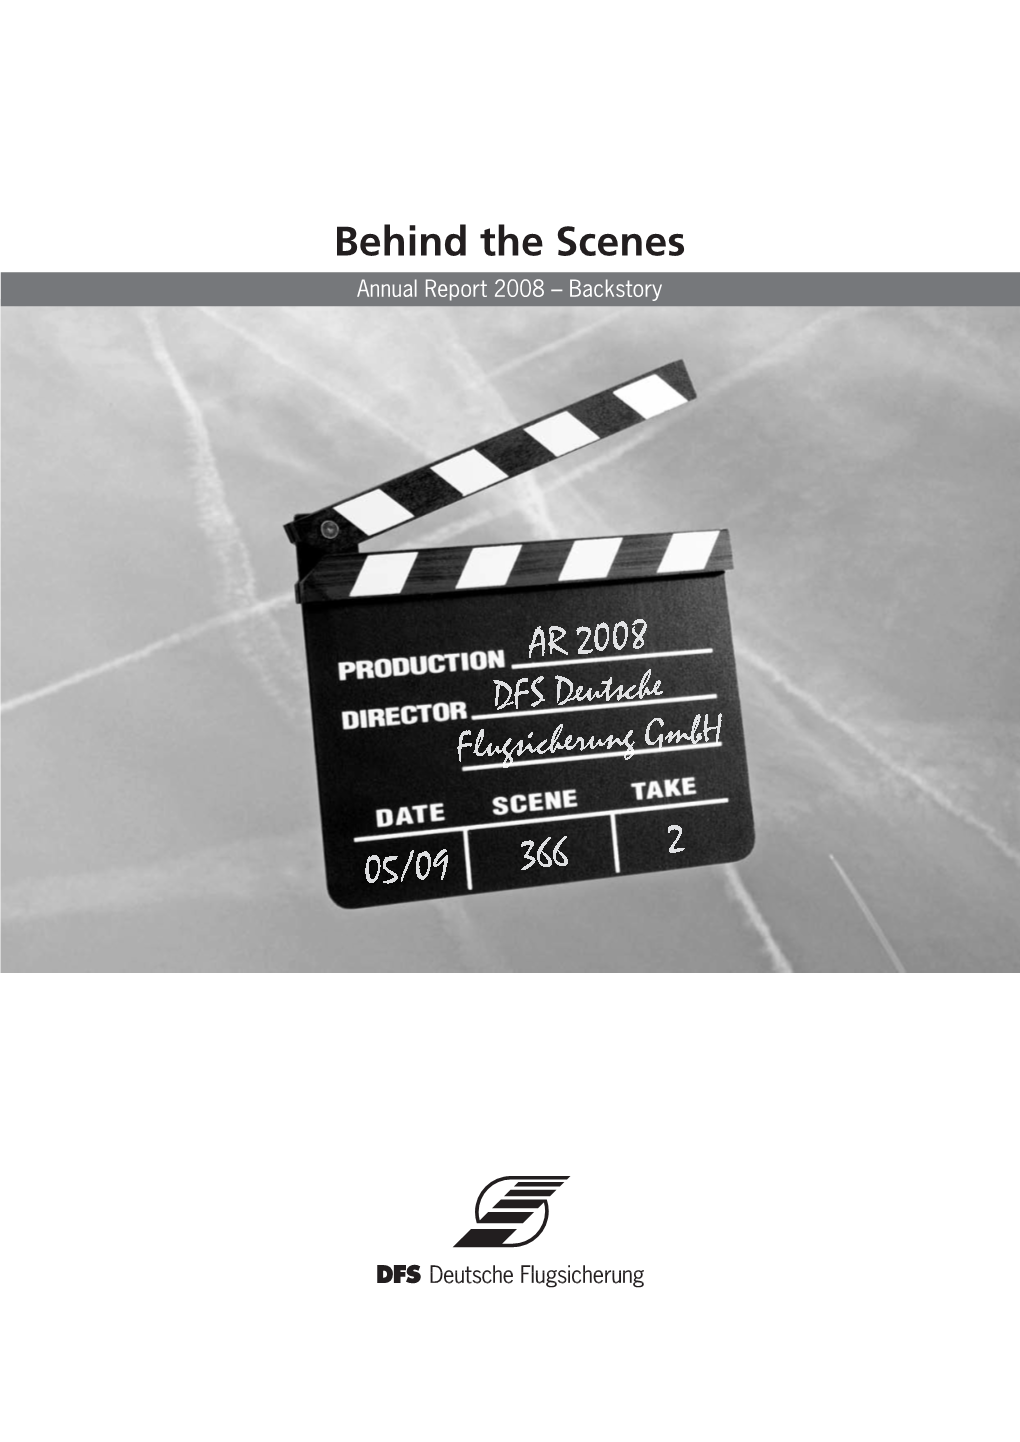 Behind the Scenes Annual Report 2008 – Backstory the DFS Annual Report 2008 Is Divided Into Two Separate Volumes: Volume 1 Thematic Part Volume 2 Financial Part